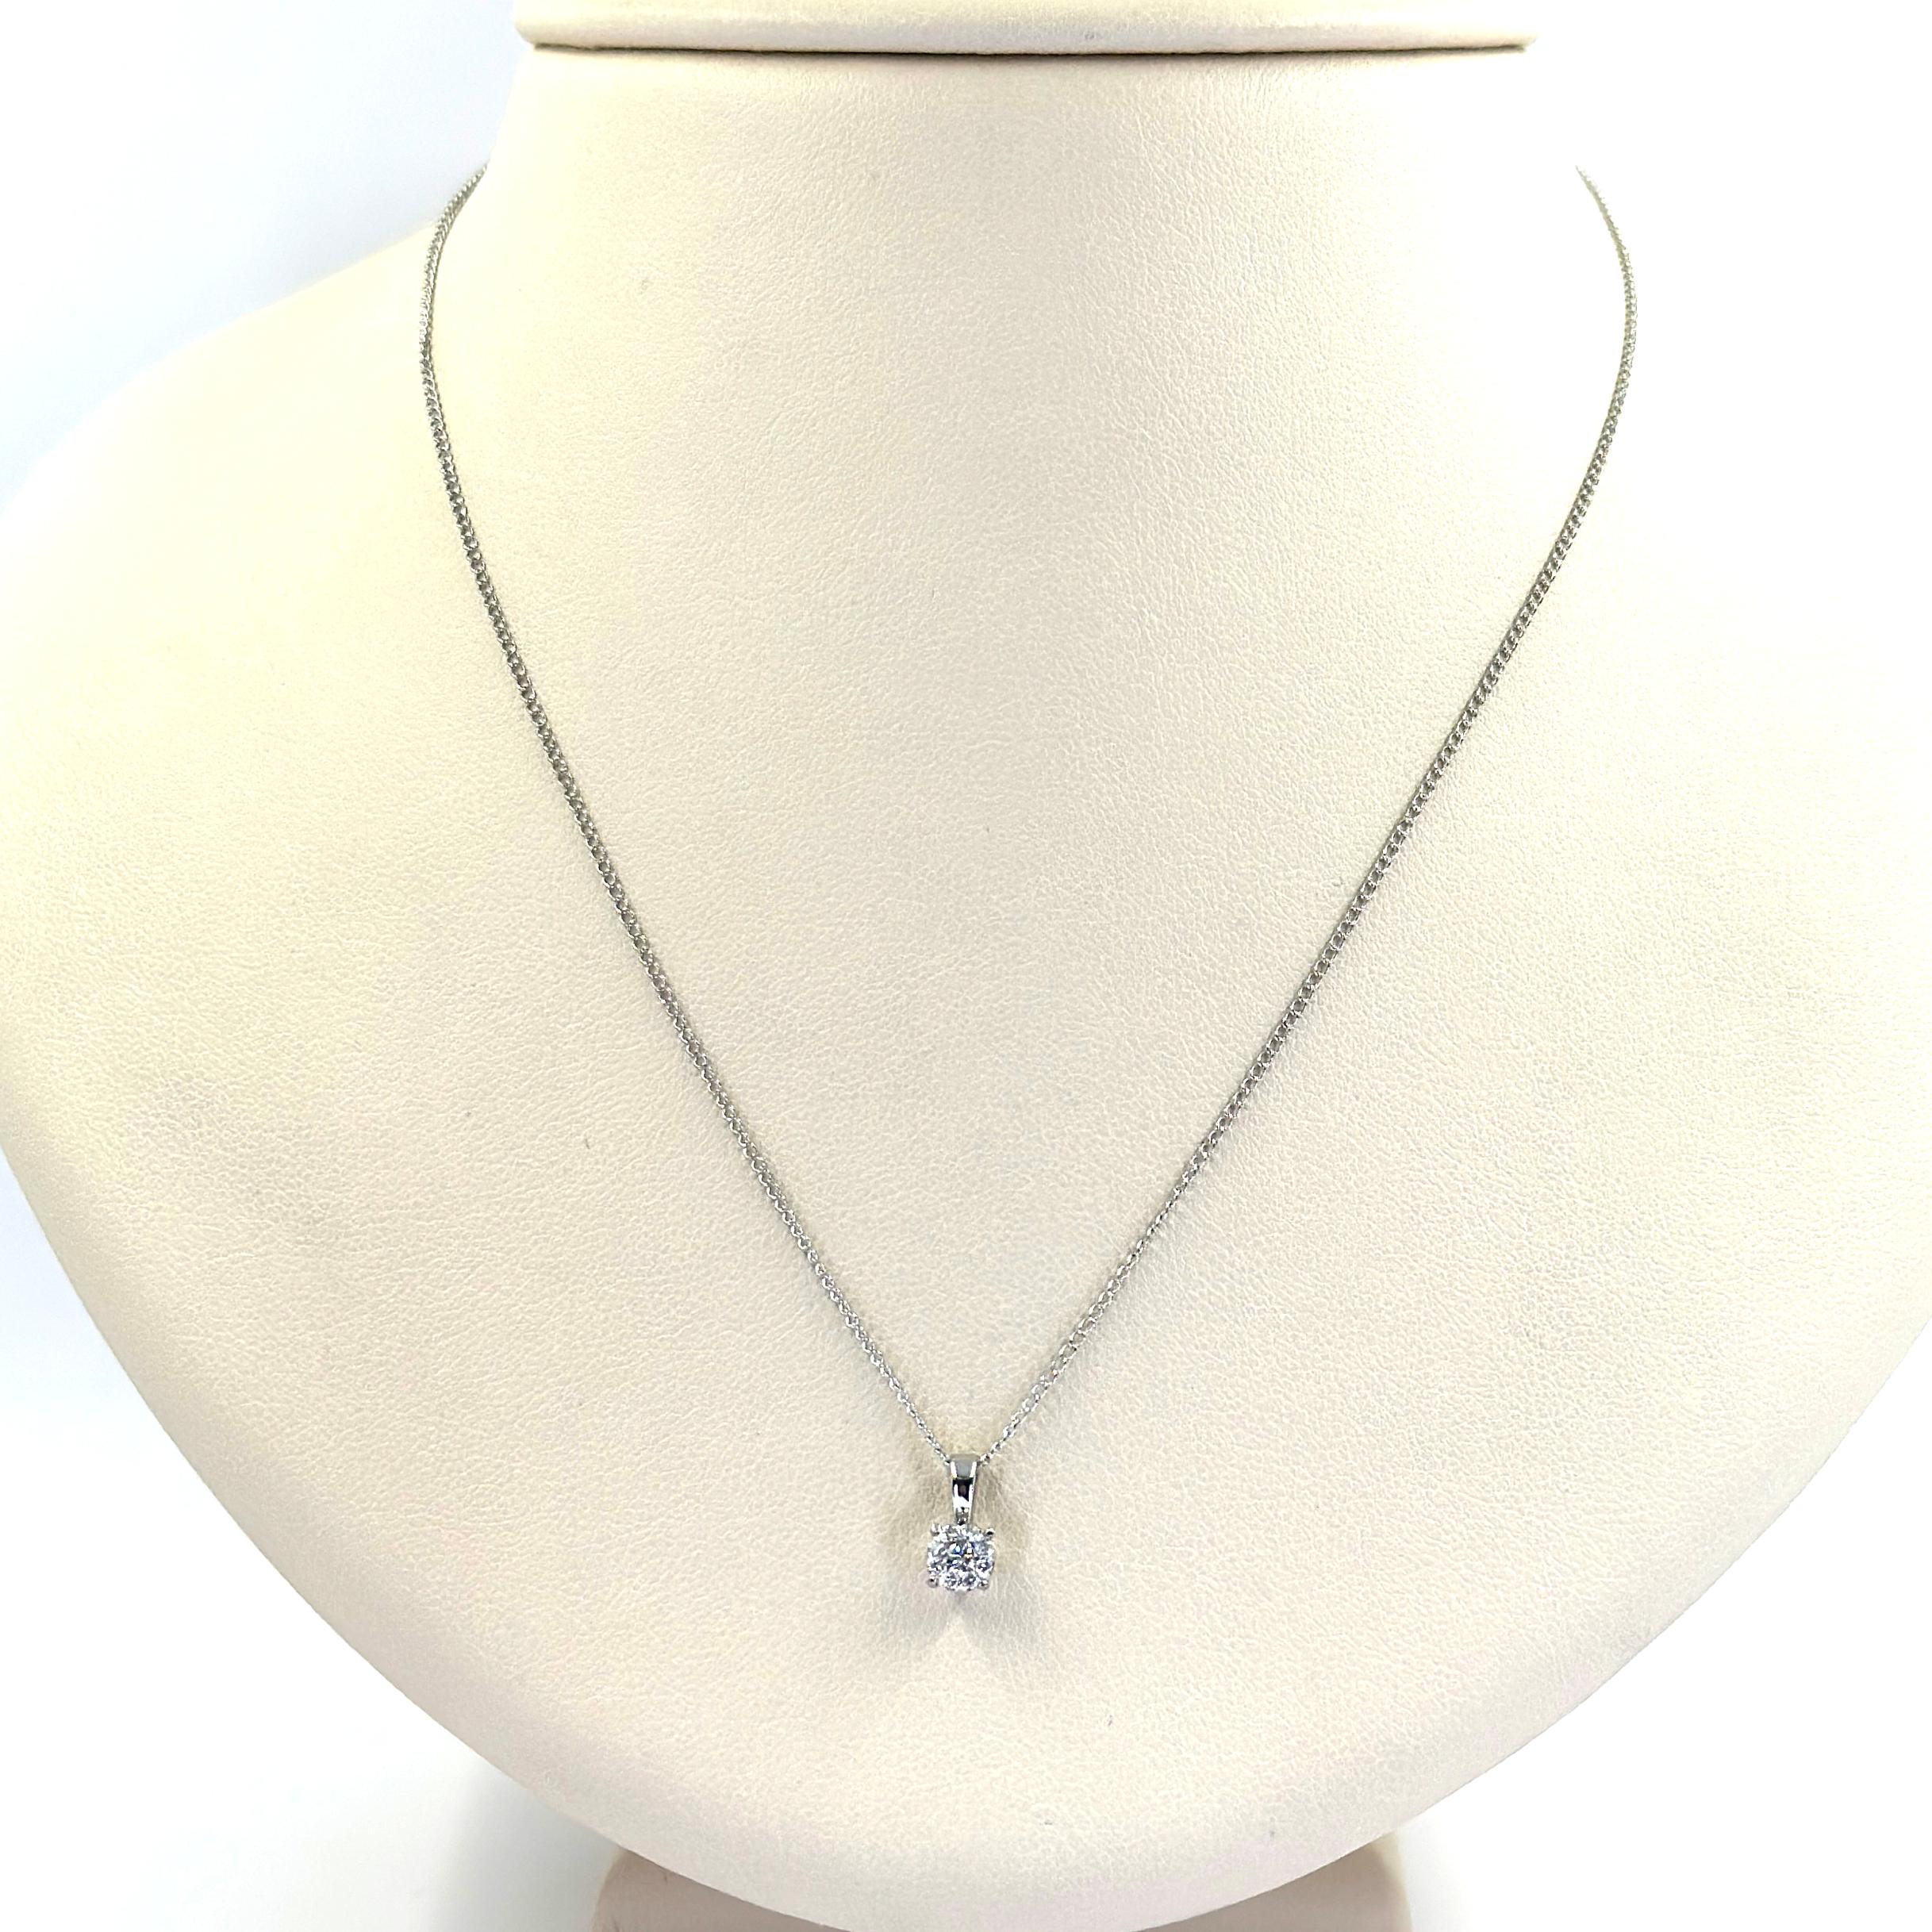 Le Cirque 14 Karat White Gold Diamond Cluster Pendant Necklace Featuring 9 Round Diamonds of VS Clarity and G Color Totaling Approximately 0.10 Carats. Open Curb Link Chain Measuring 15 Inches Long. Finished Weight is 1.3 Grams. 